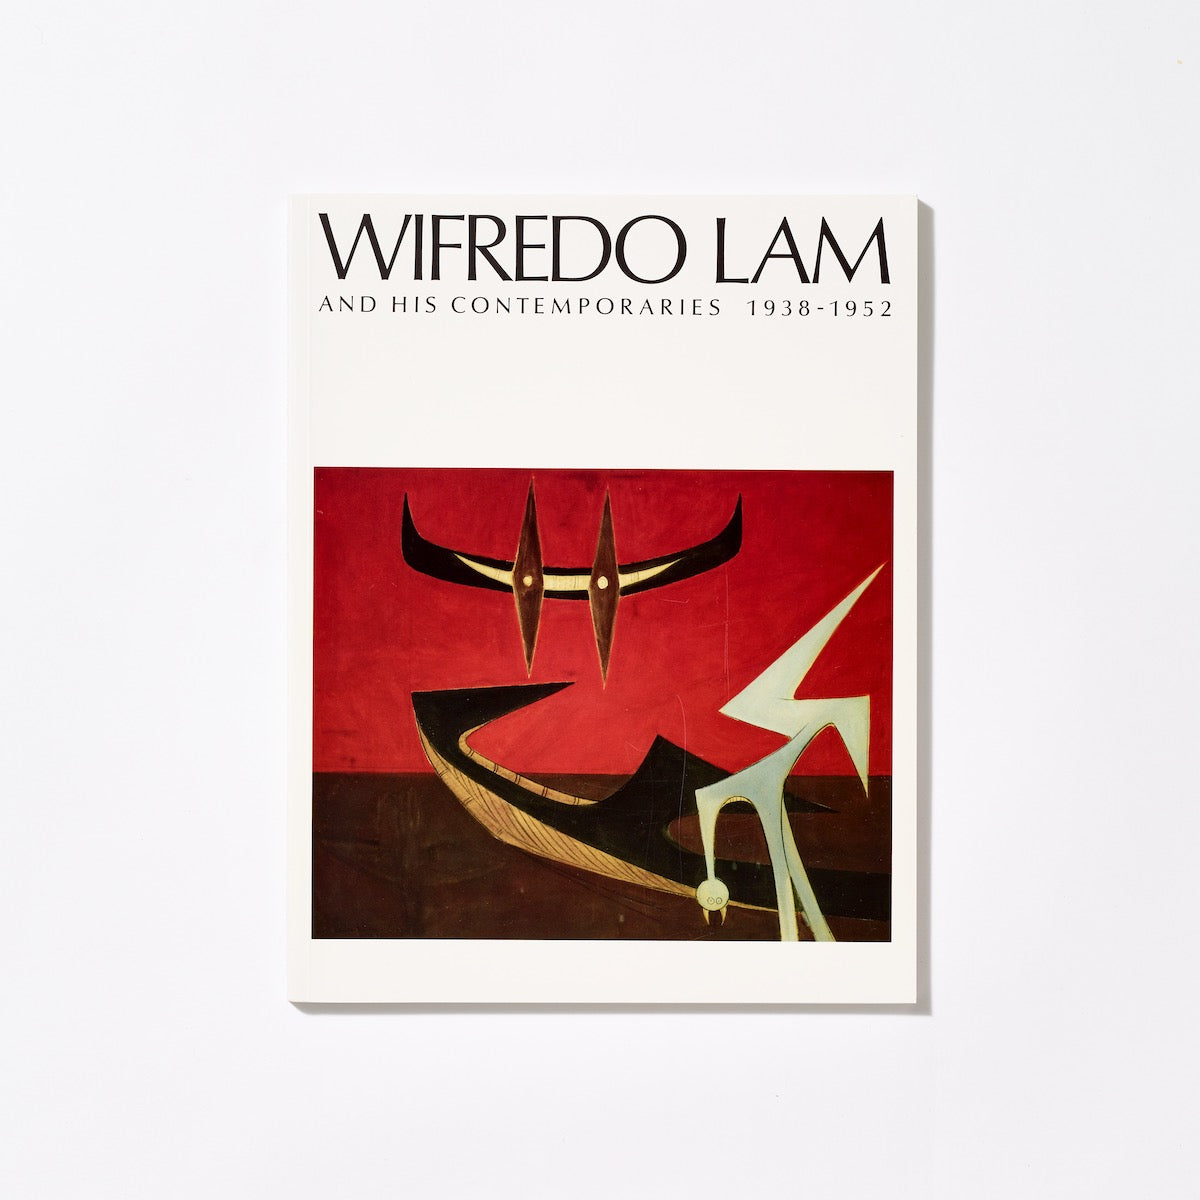 Wifredo Lam and His Contemporaries, 1938 - 1952